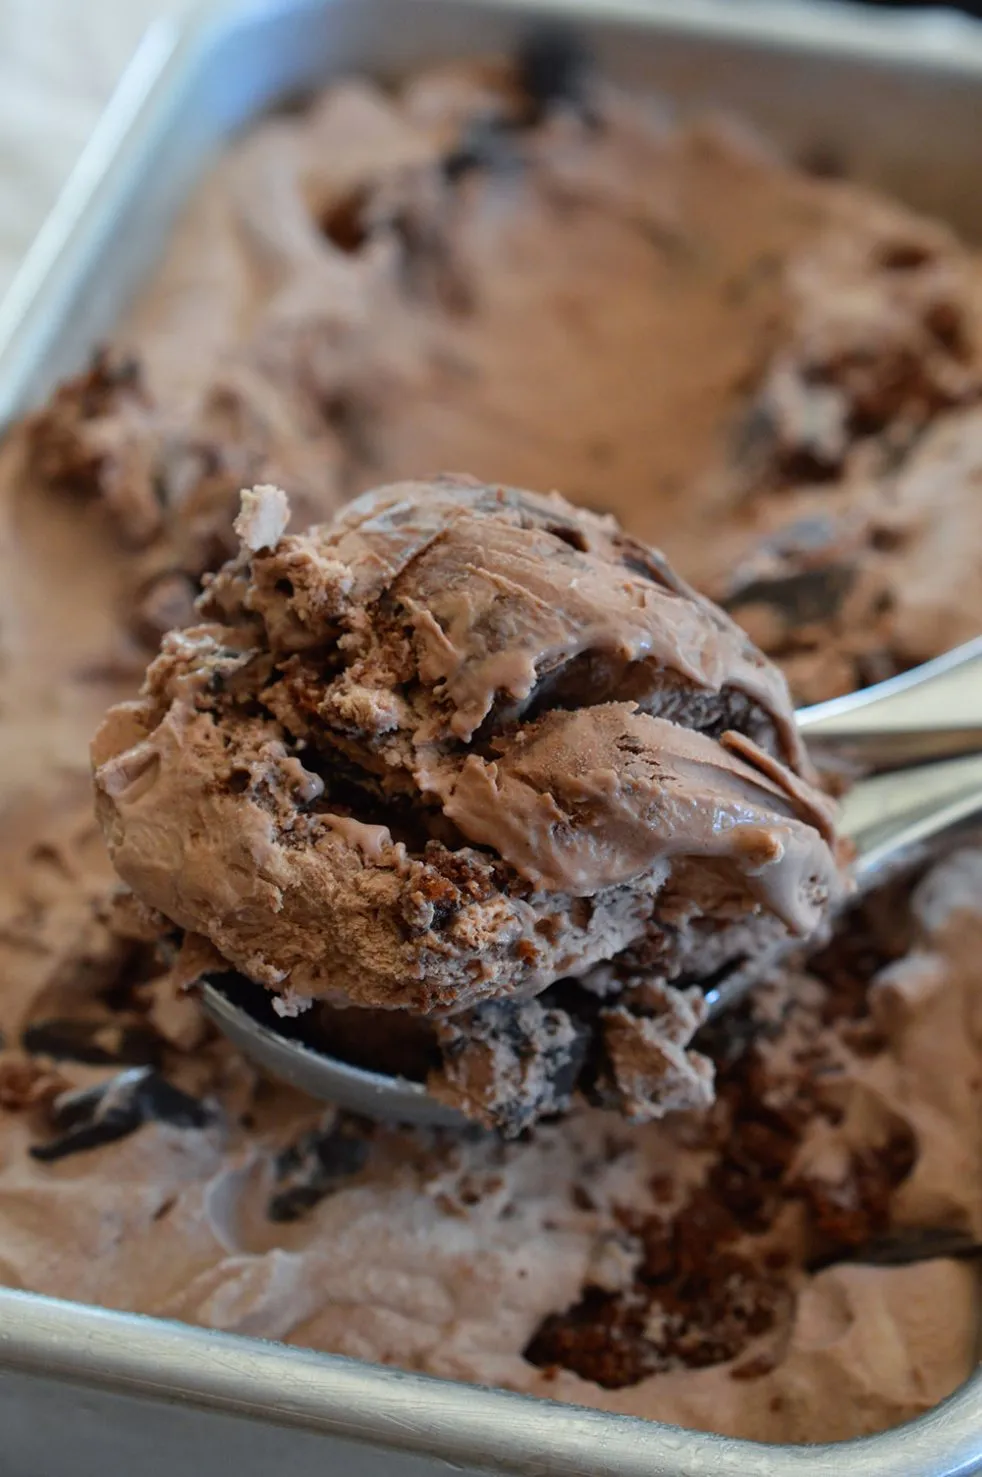 Extreme Chocolate Ice Cream is a must make recipe. This No Churn Ice Cream is packed with Chocolate Chunks and Brownies! Inspired by my favorite Dairy Queen Blizzard flavor. Death By Chocolate never tasted so good!